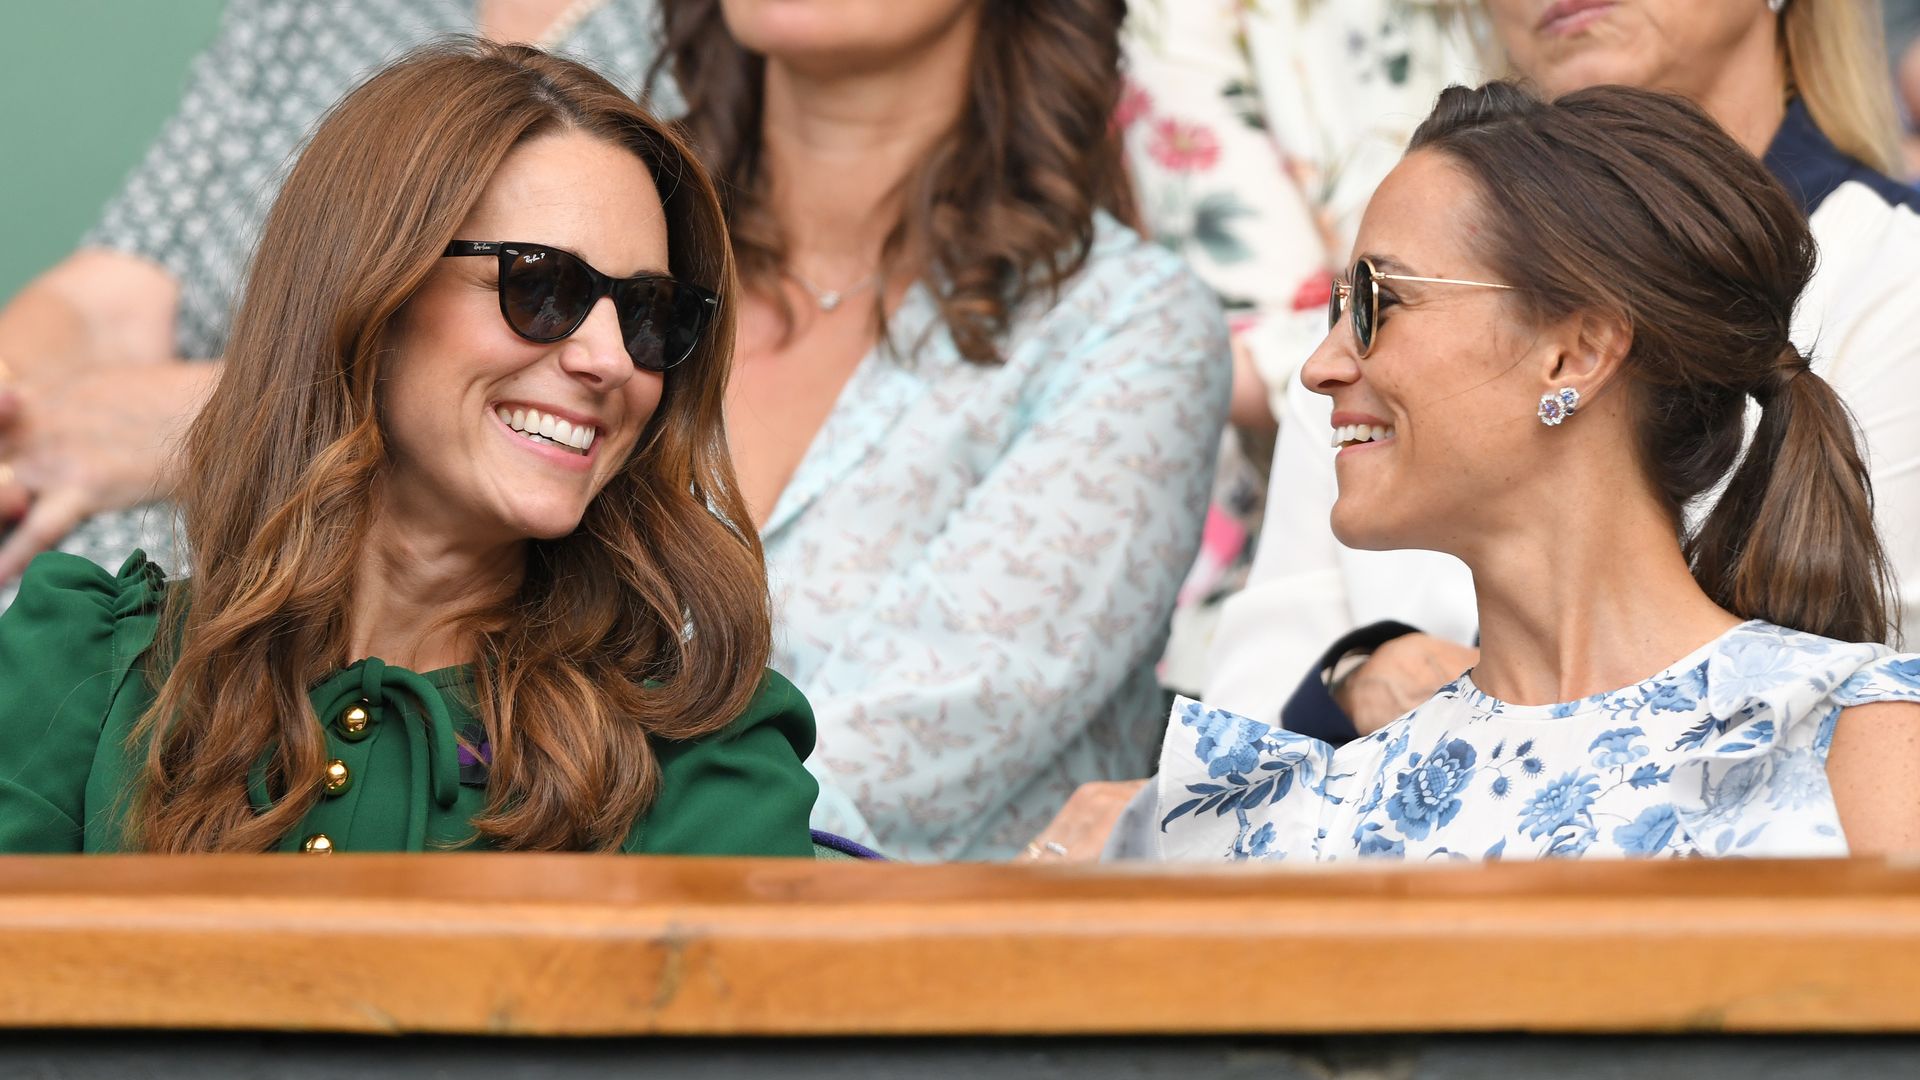 Princess Kate's 40th birthday plans were so different to sister Pippa Middleton